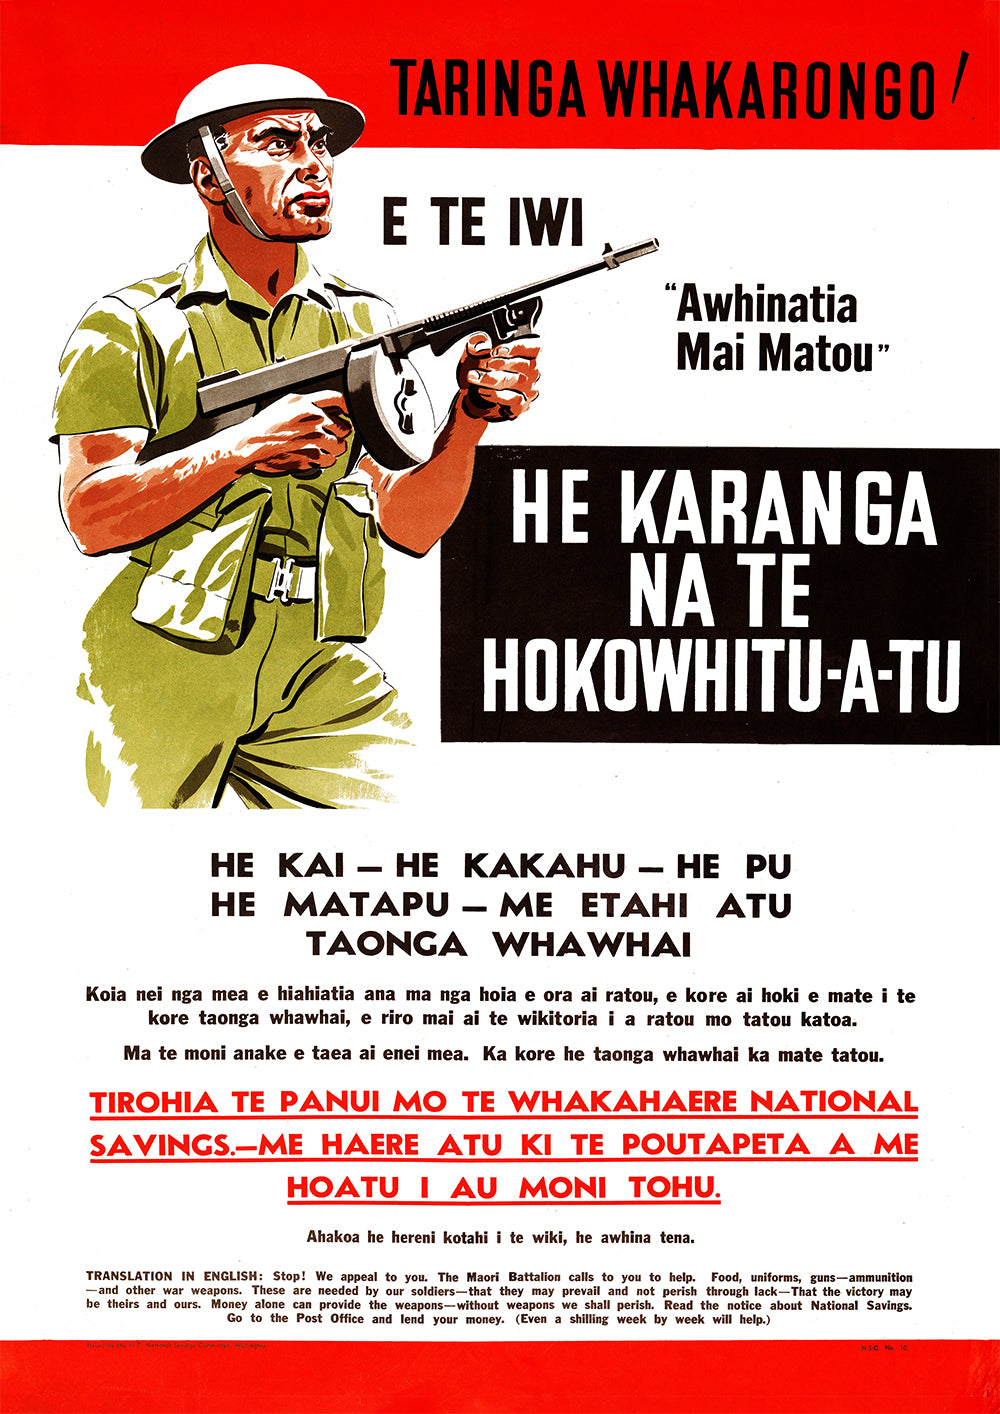 Stop! We appeal to you — New Zealand poster